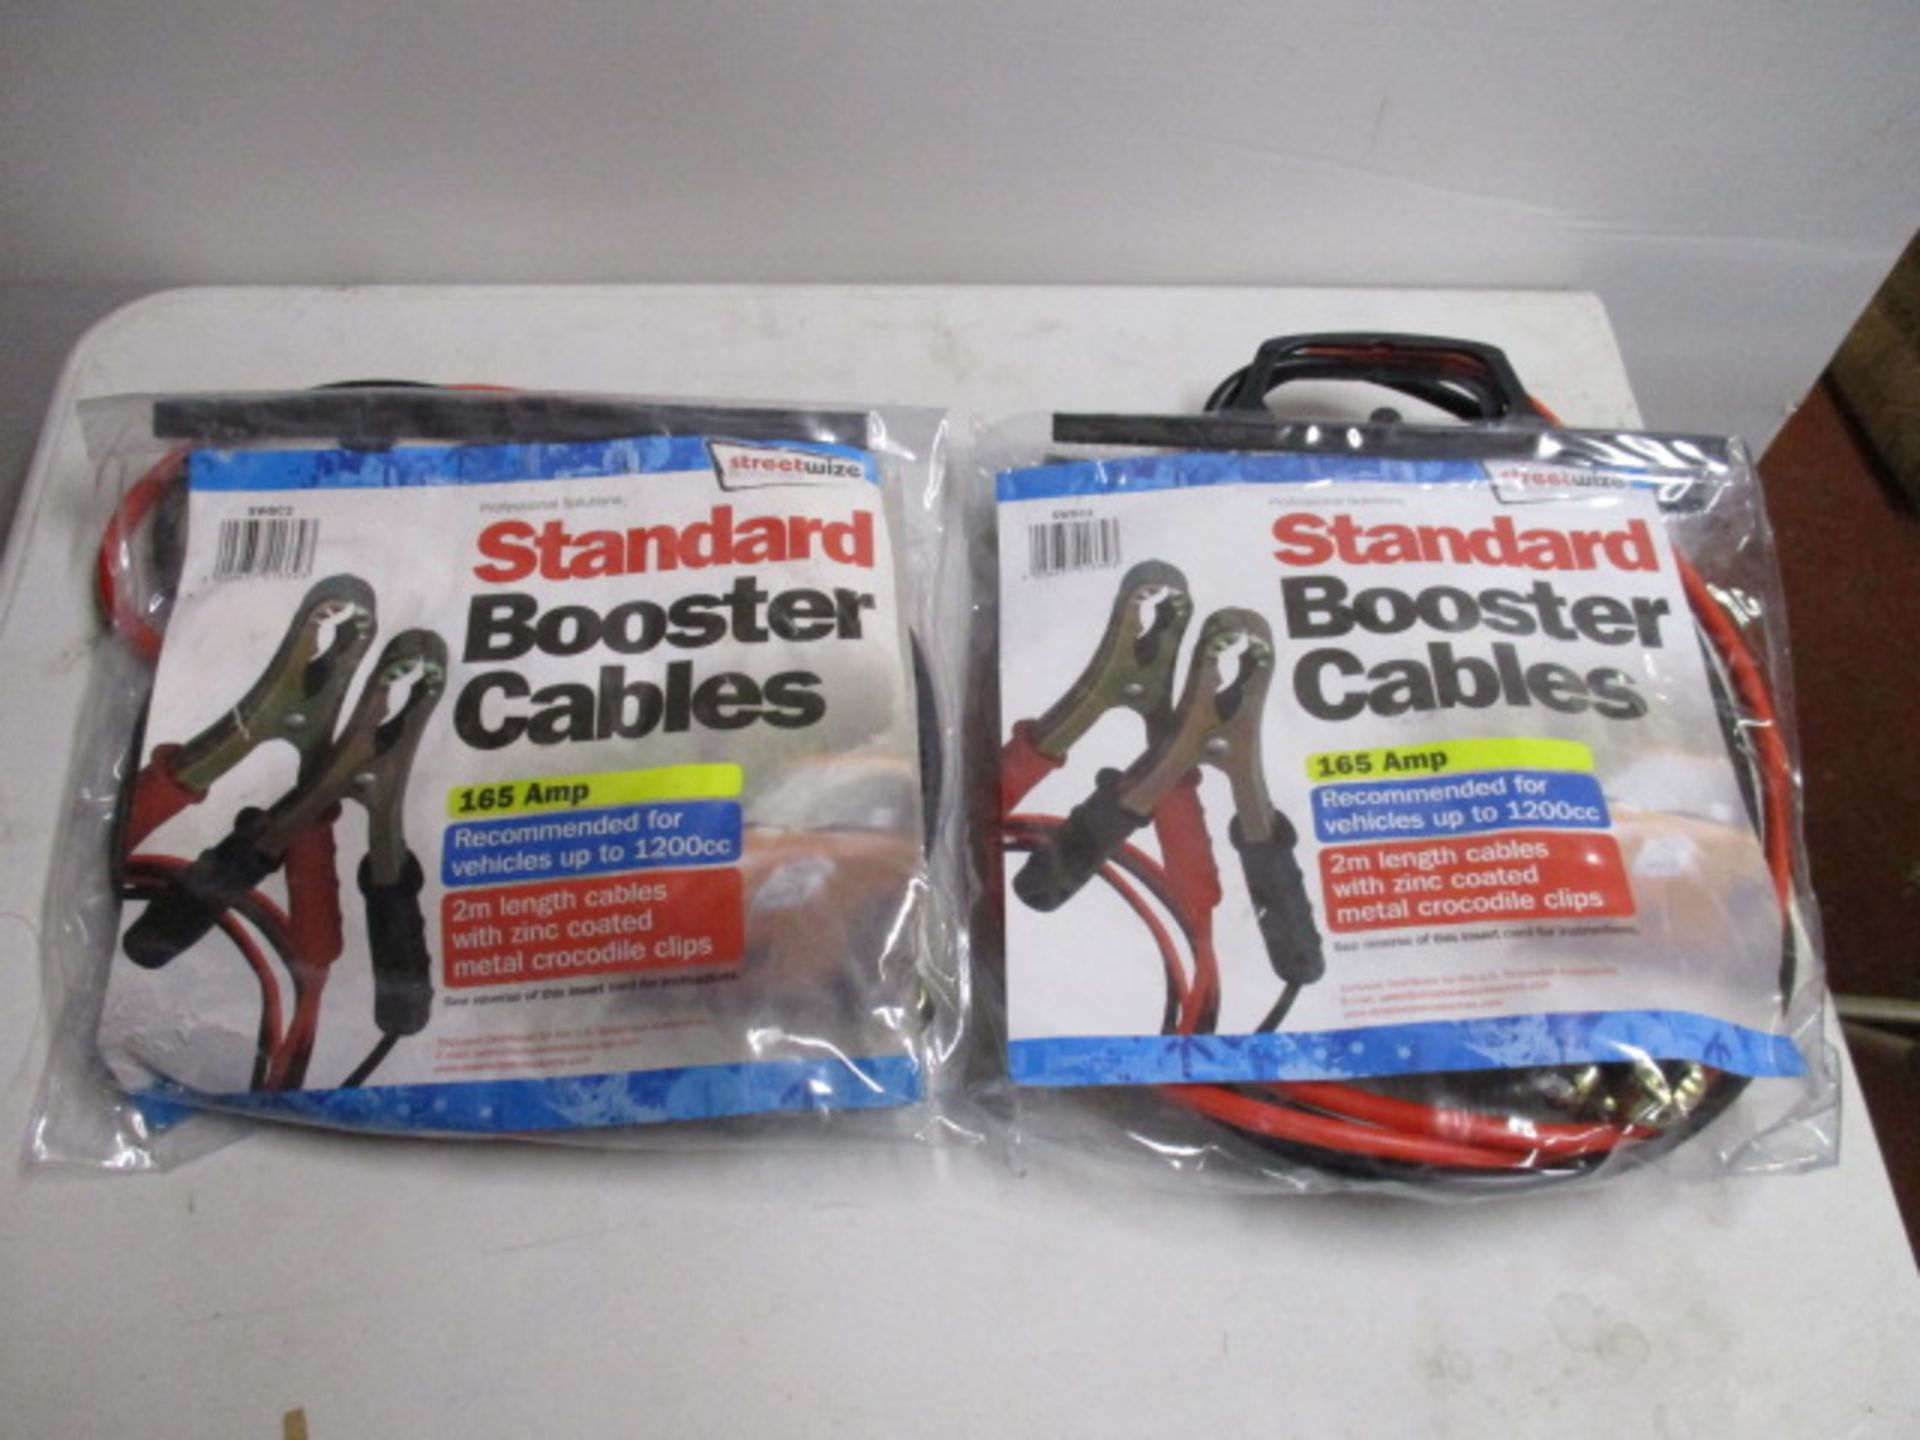 2 Pieces Brand new Streetwize 165 amp standard booster cables